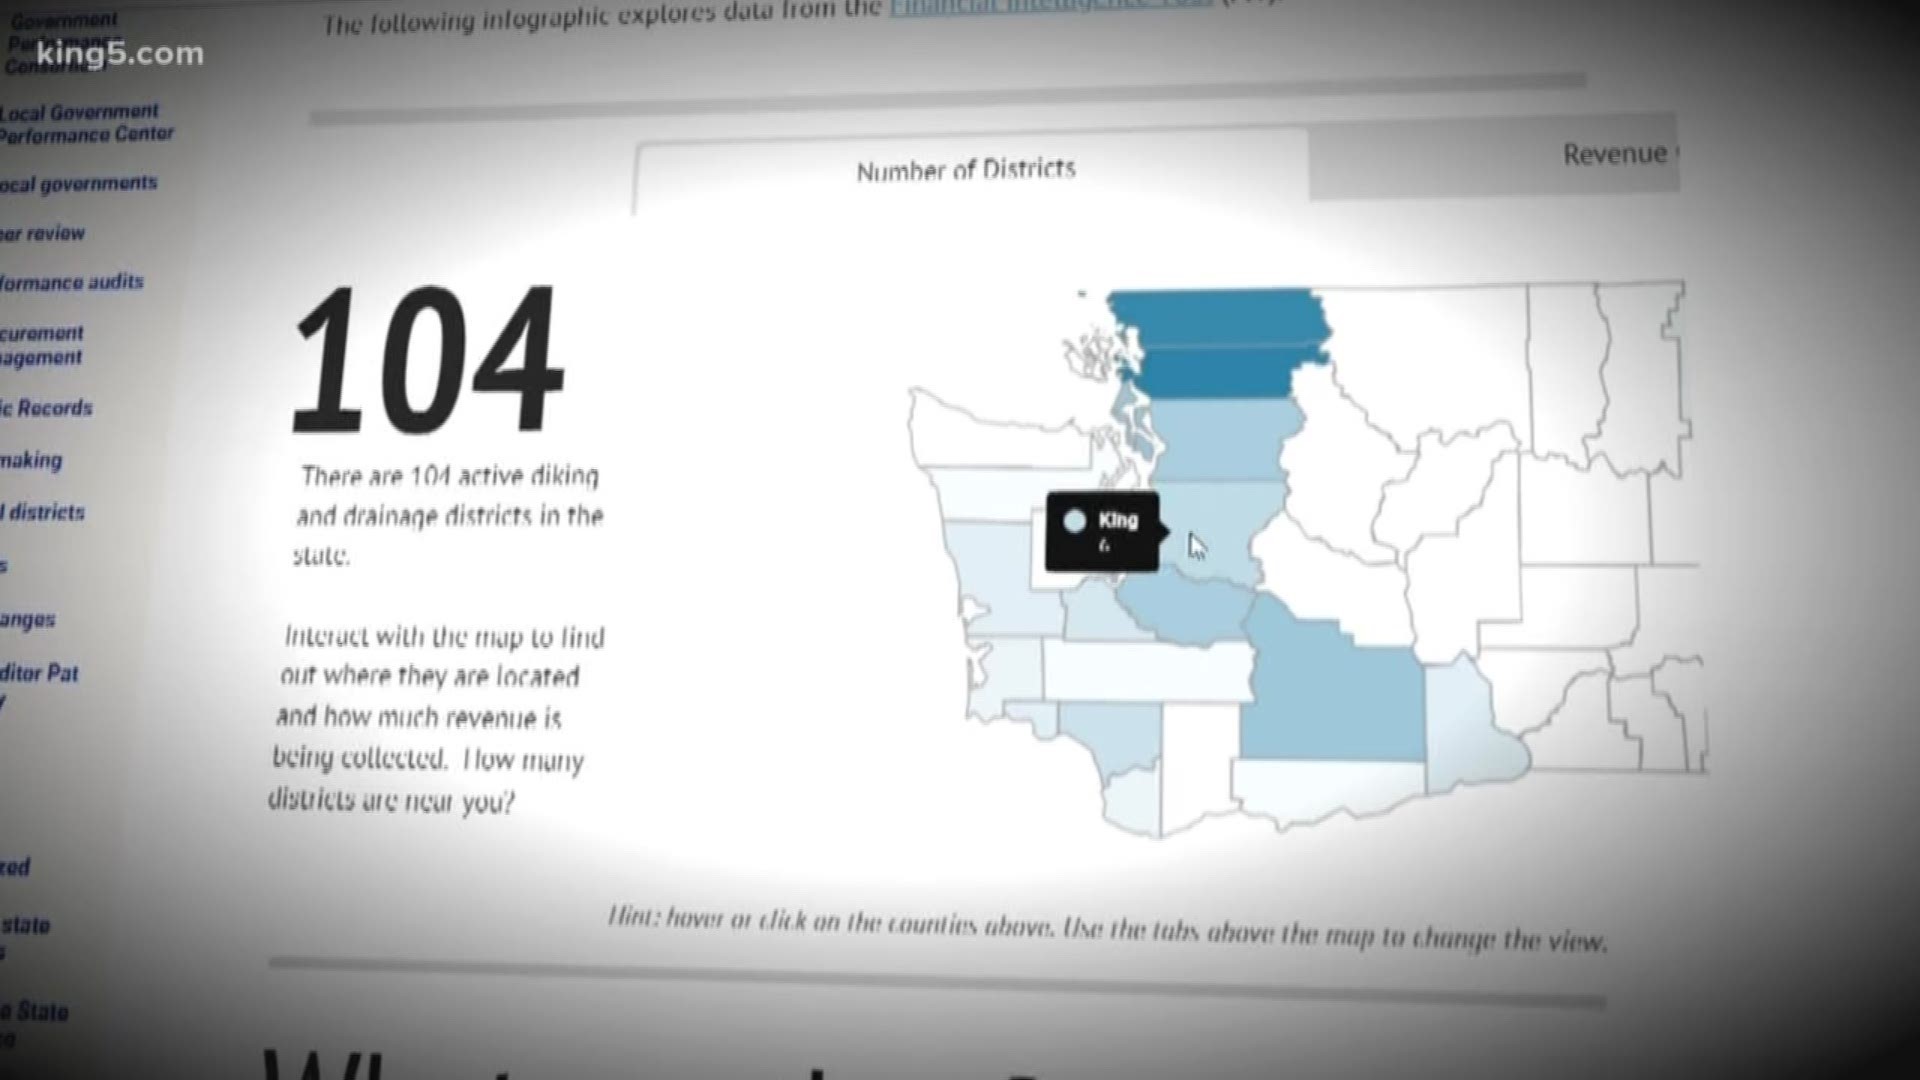 The small, special-purpose governments are under increasing scrutiny following KING 5's "Money Down the Drain" investigation. KING 5 Investigator Chris Ingalls reports.